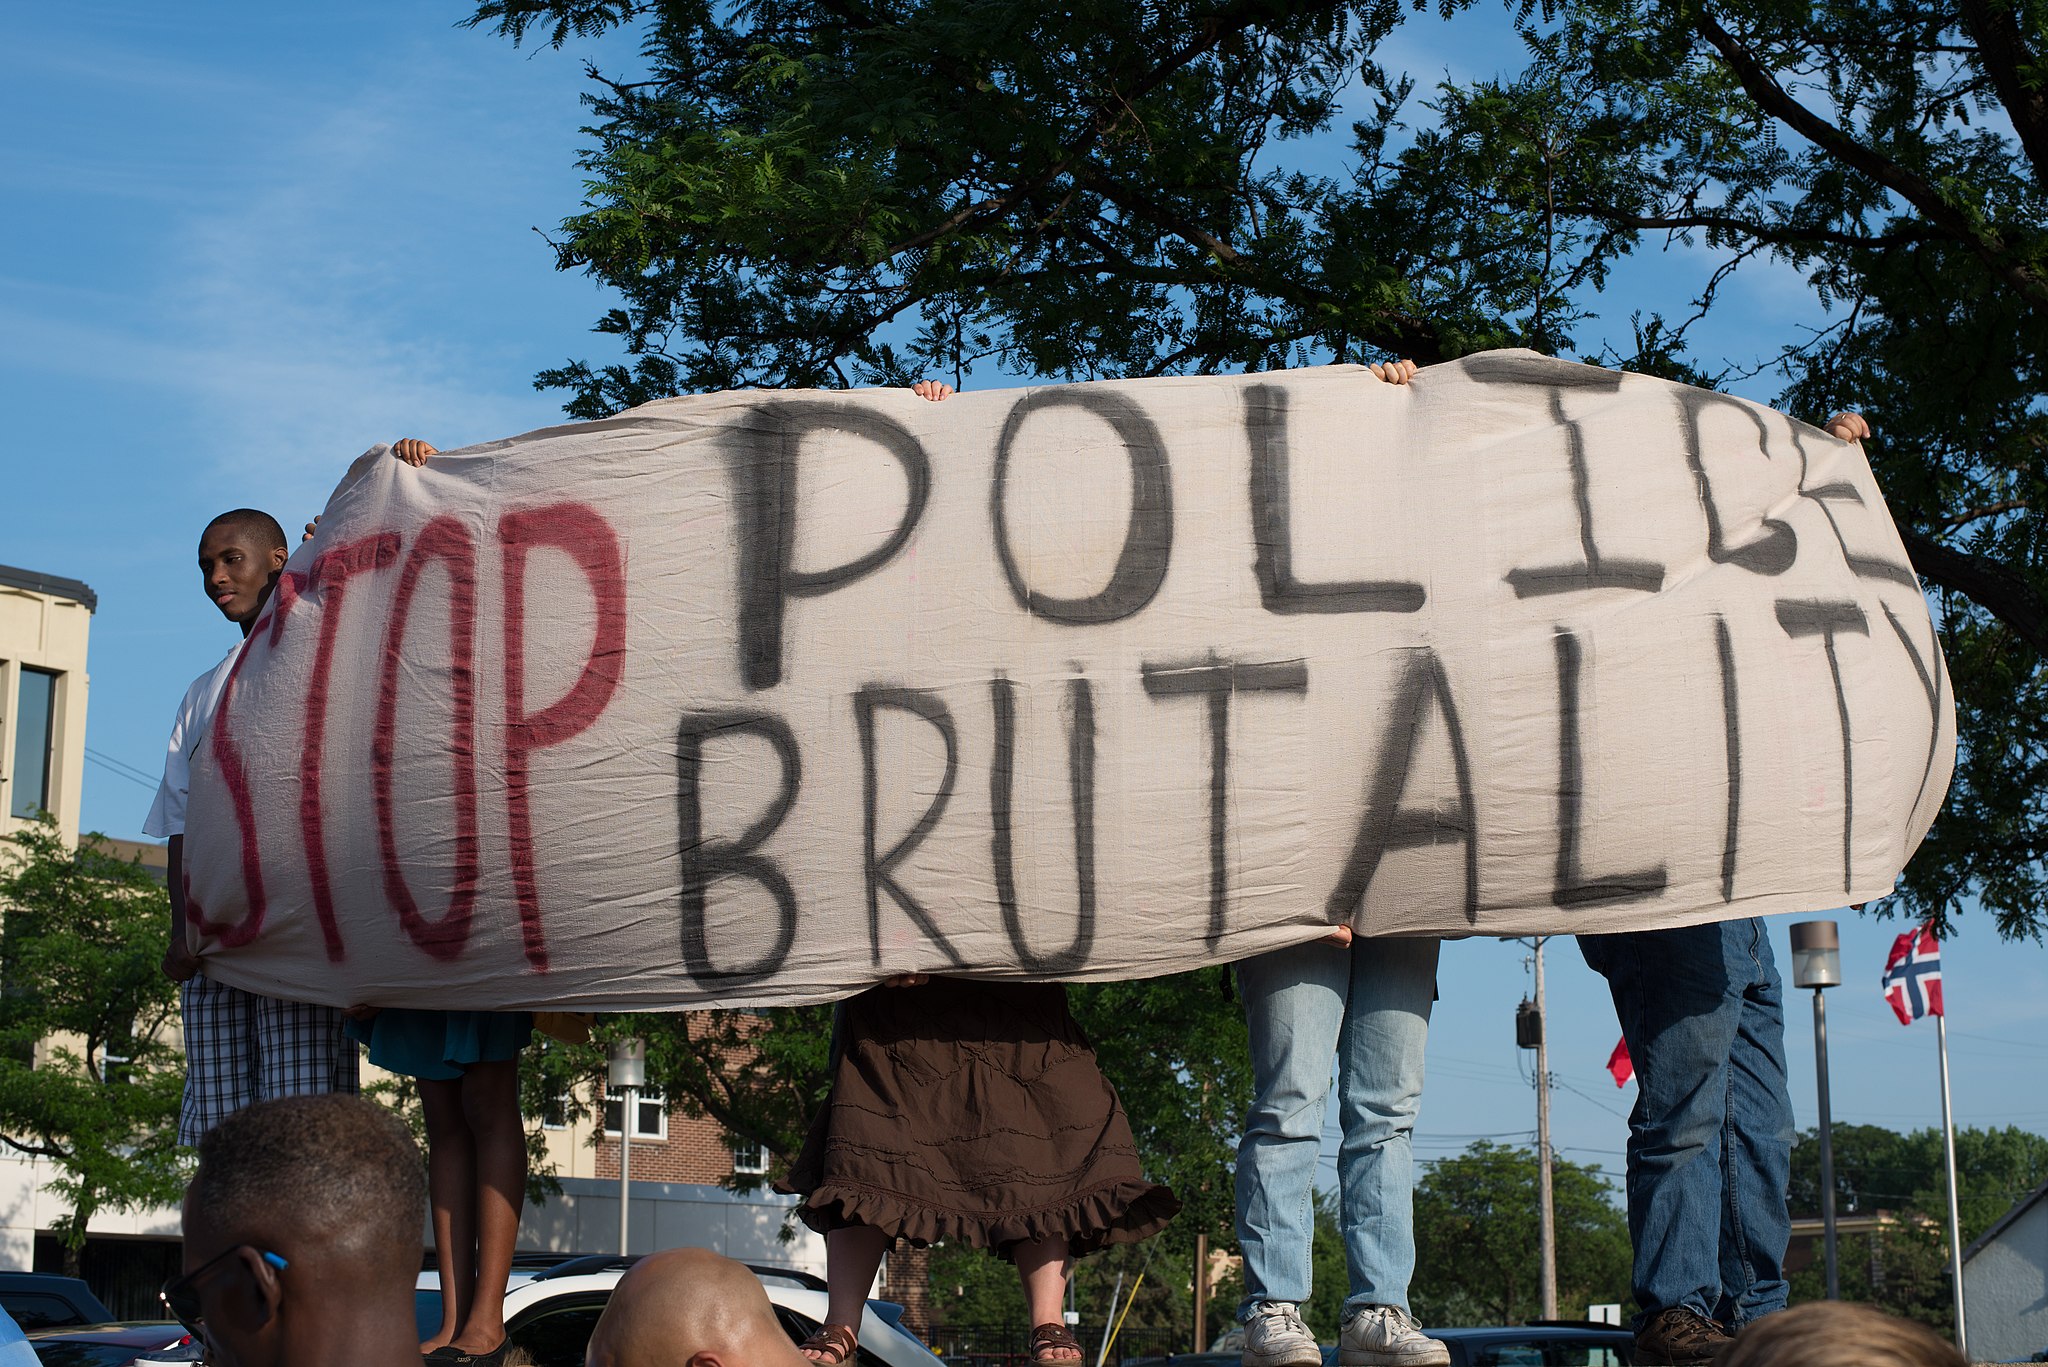 Protest against police brutality; image by Fibonacci Blue, CC BY 2.0, via Wikimedia Commons.